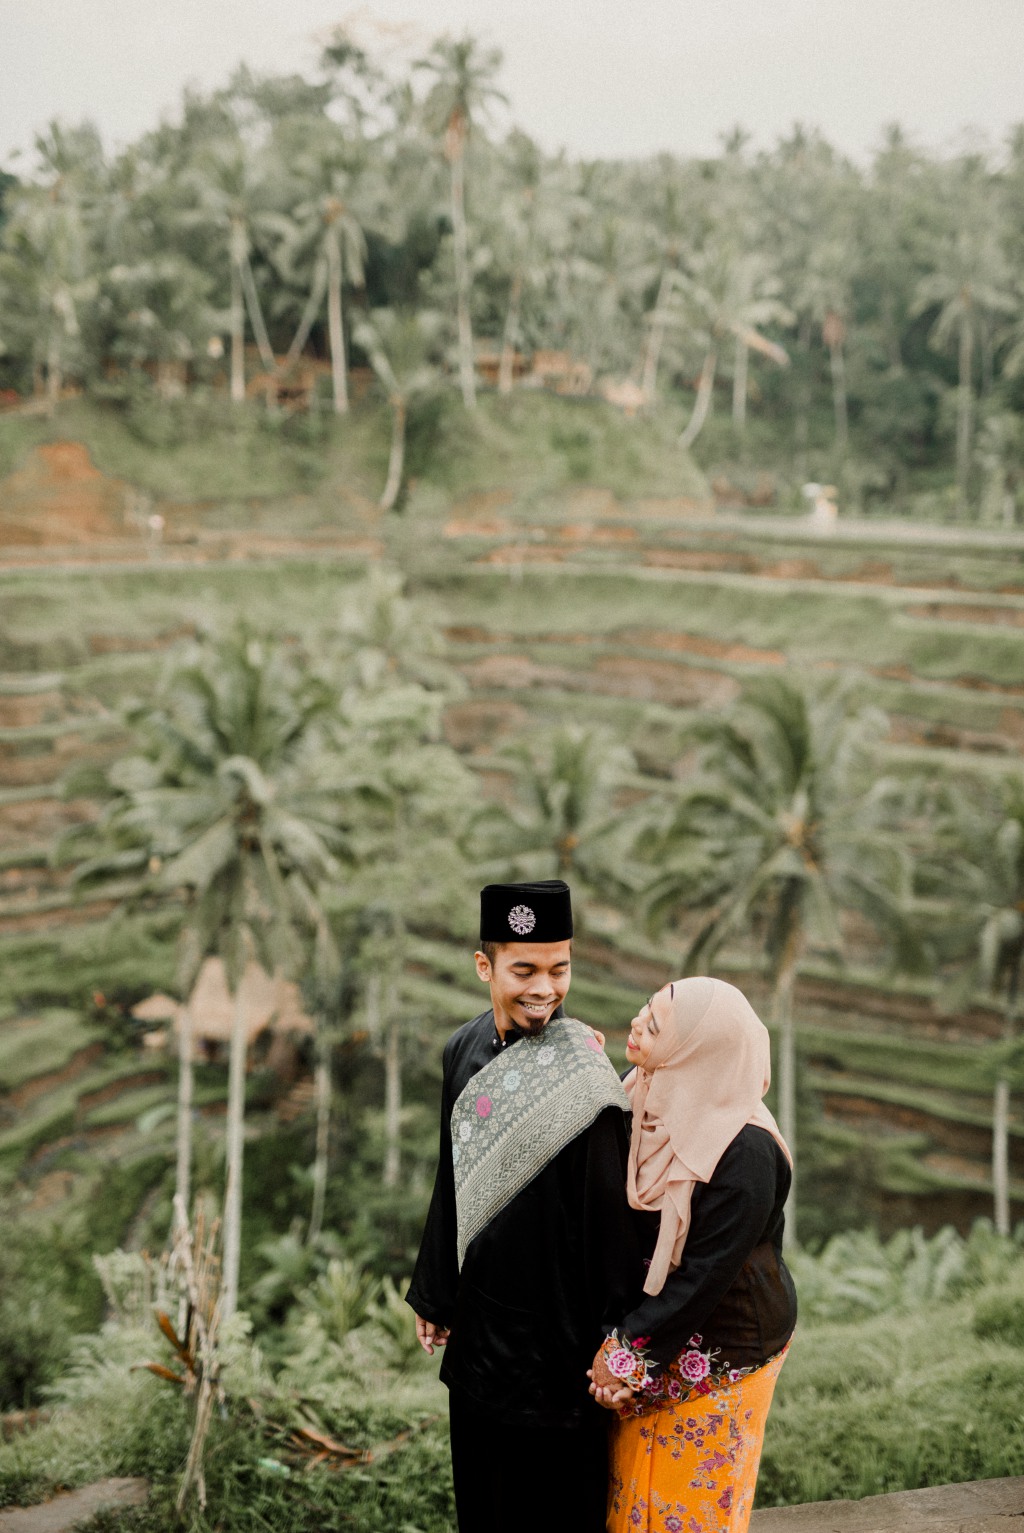 Bali Honeymoon Photography: Post-Wedding Photoshoot For Malay Couple At Tegallalang Rice Paddies  by Dex on OneThreeOneFour 5